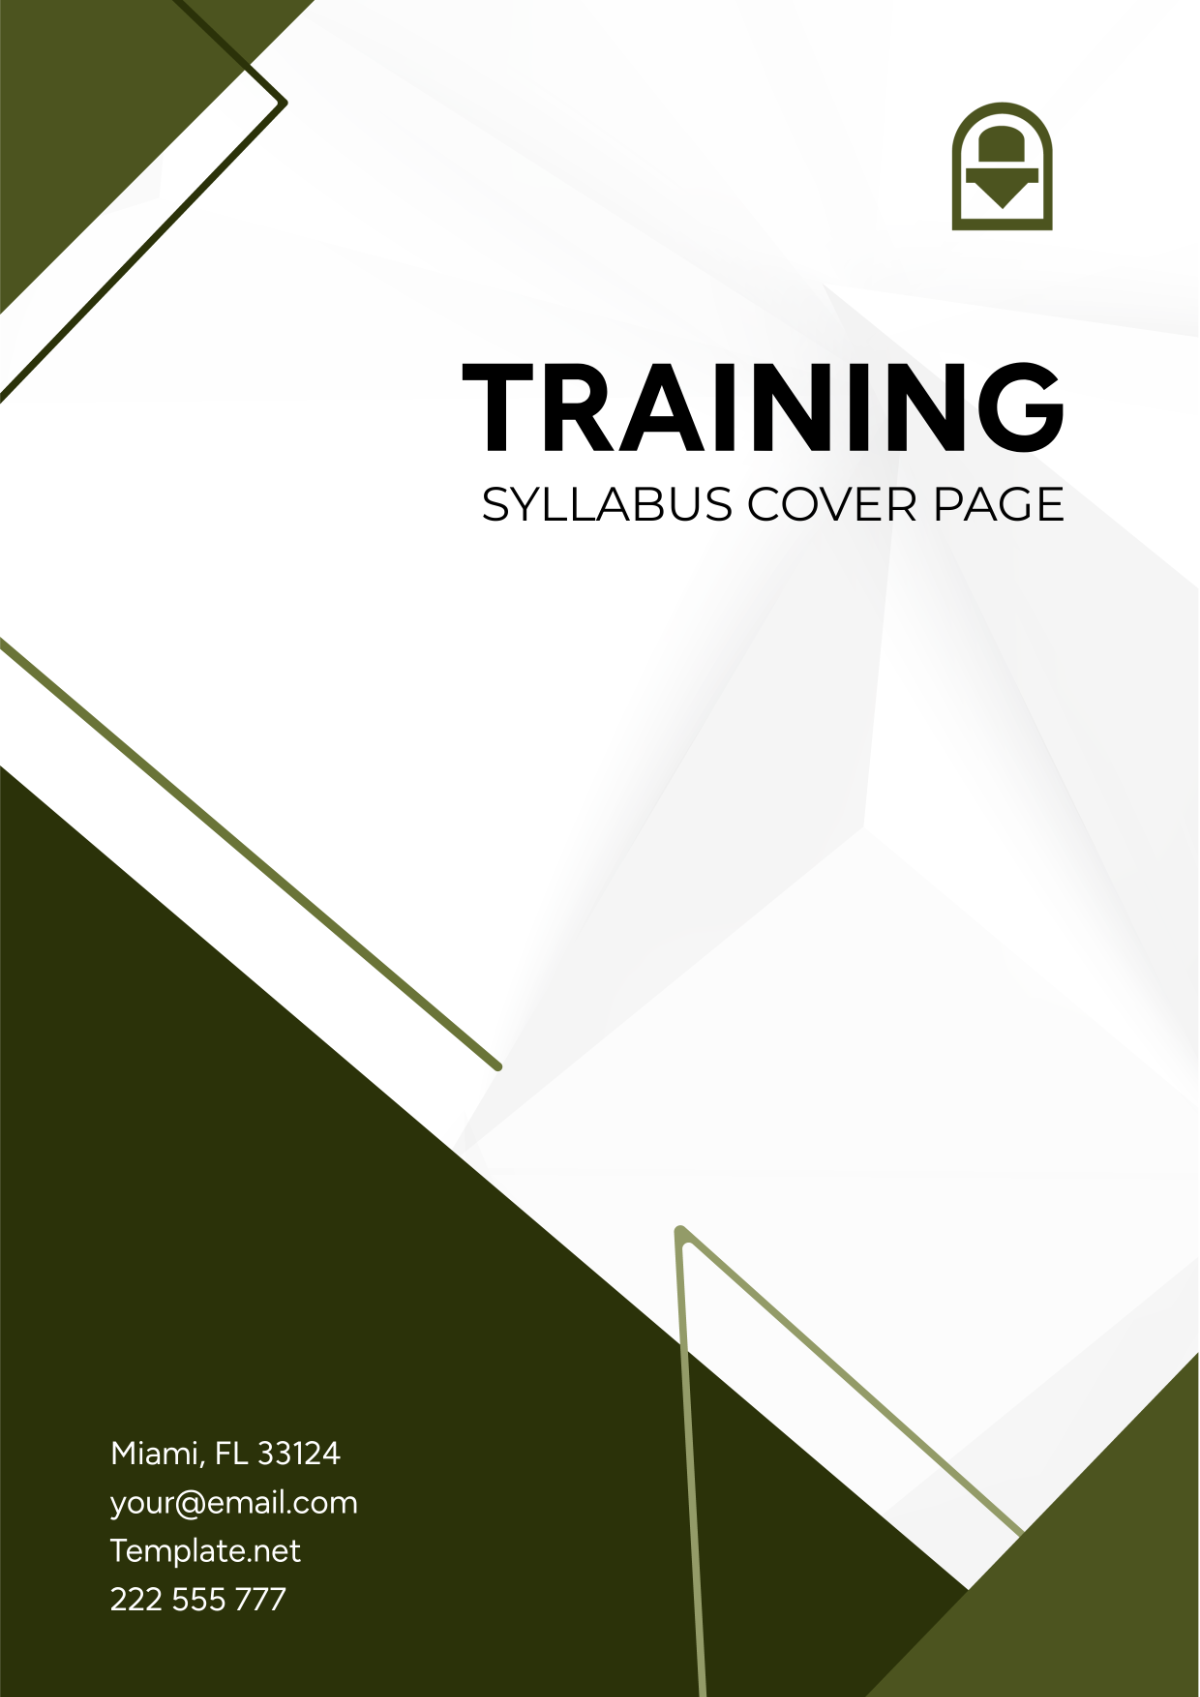 Training Syllabus Cover Page